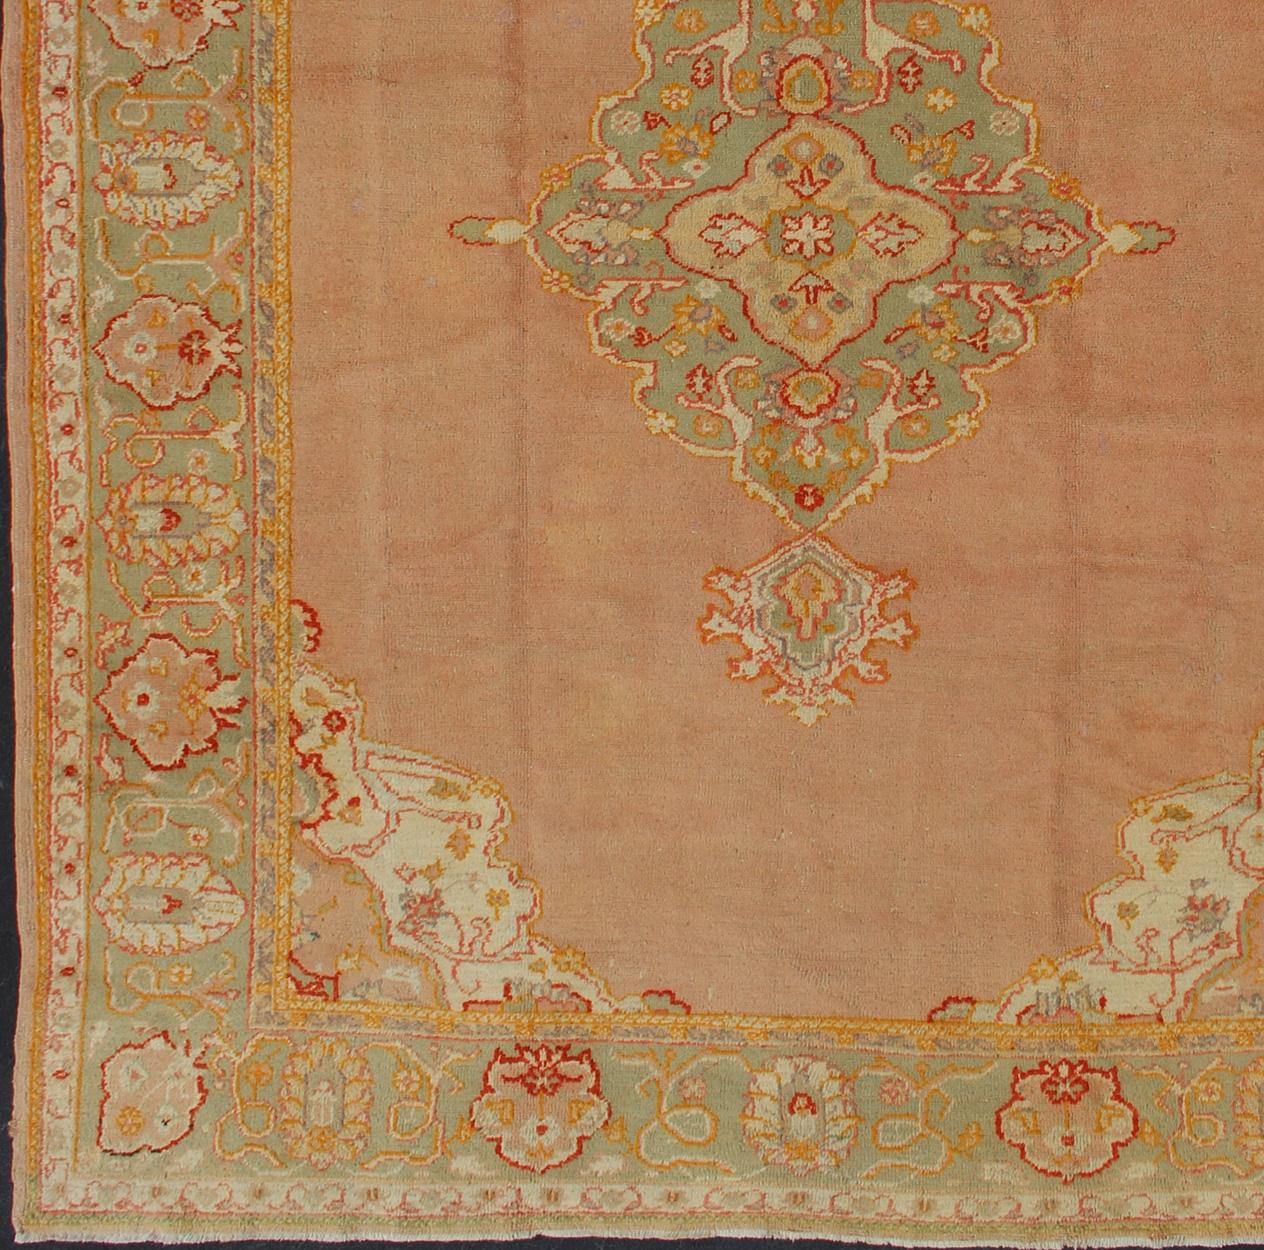 Antique Turkish Oushak in pink background and light green border, rug / 13-1004
This antique Oushak from the early part of 20th century bears a stylized medallion that commands the center field. Coral and light pink in the field surround the green